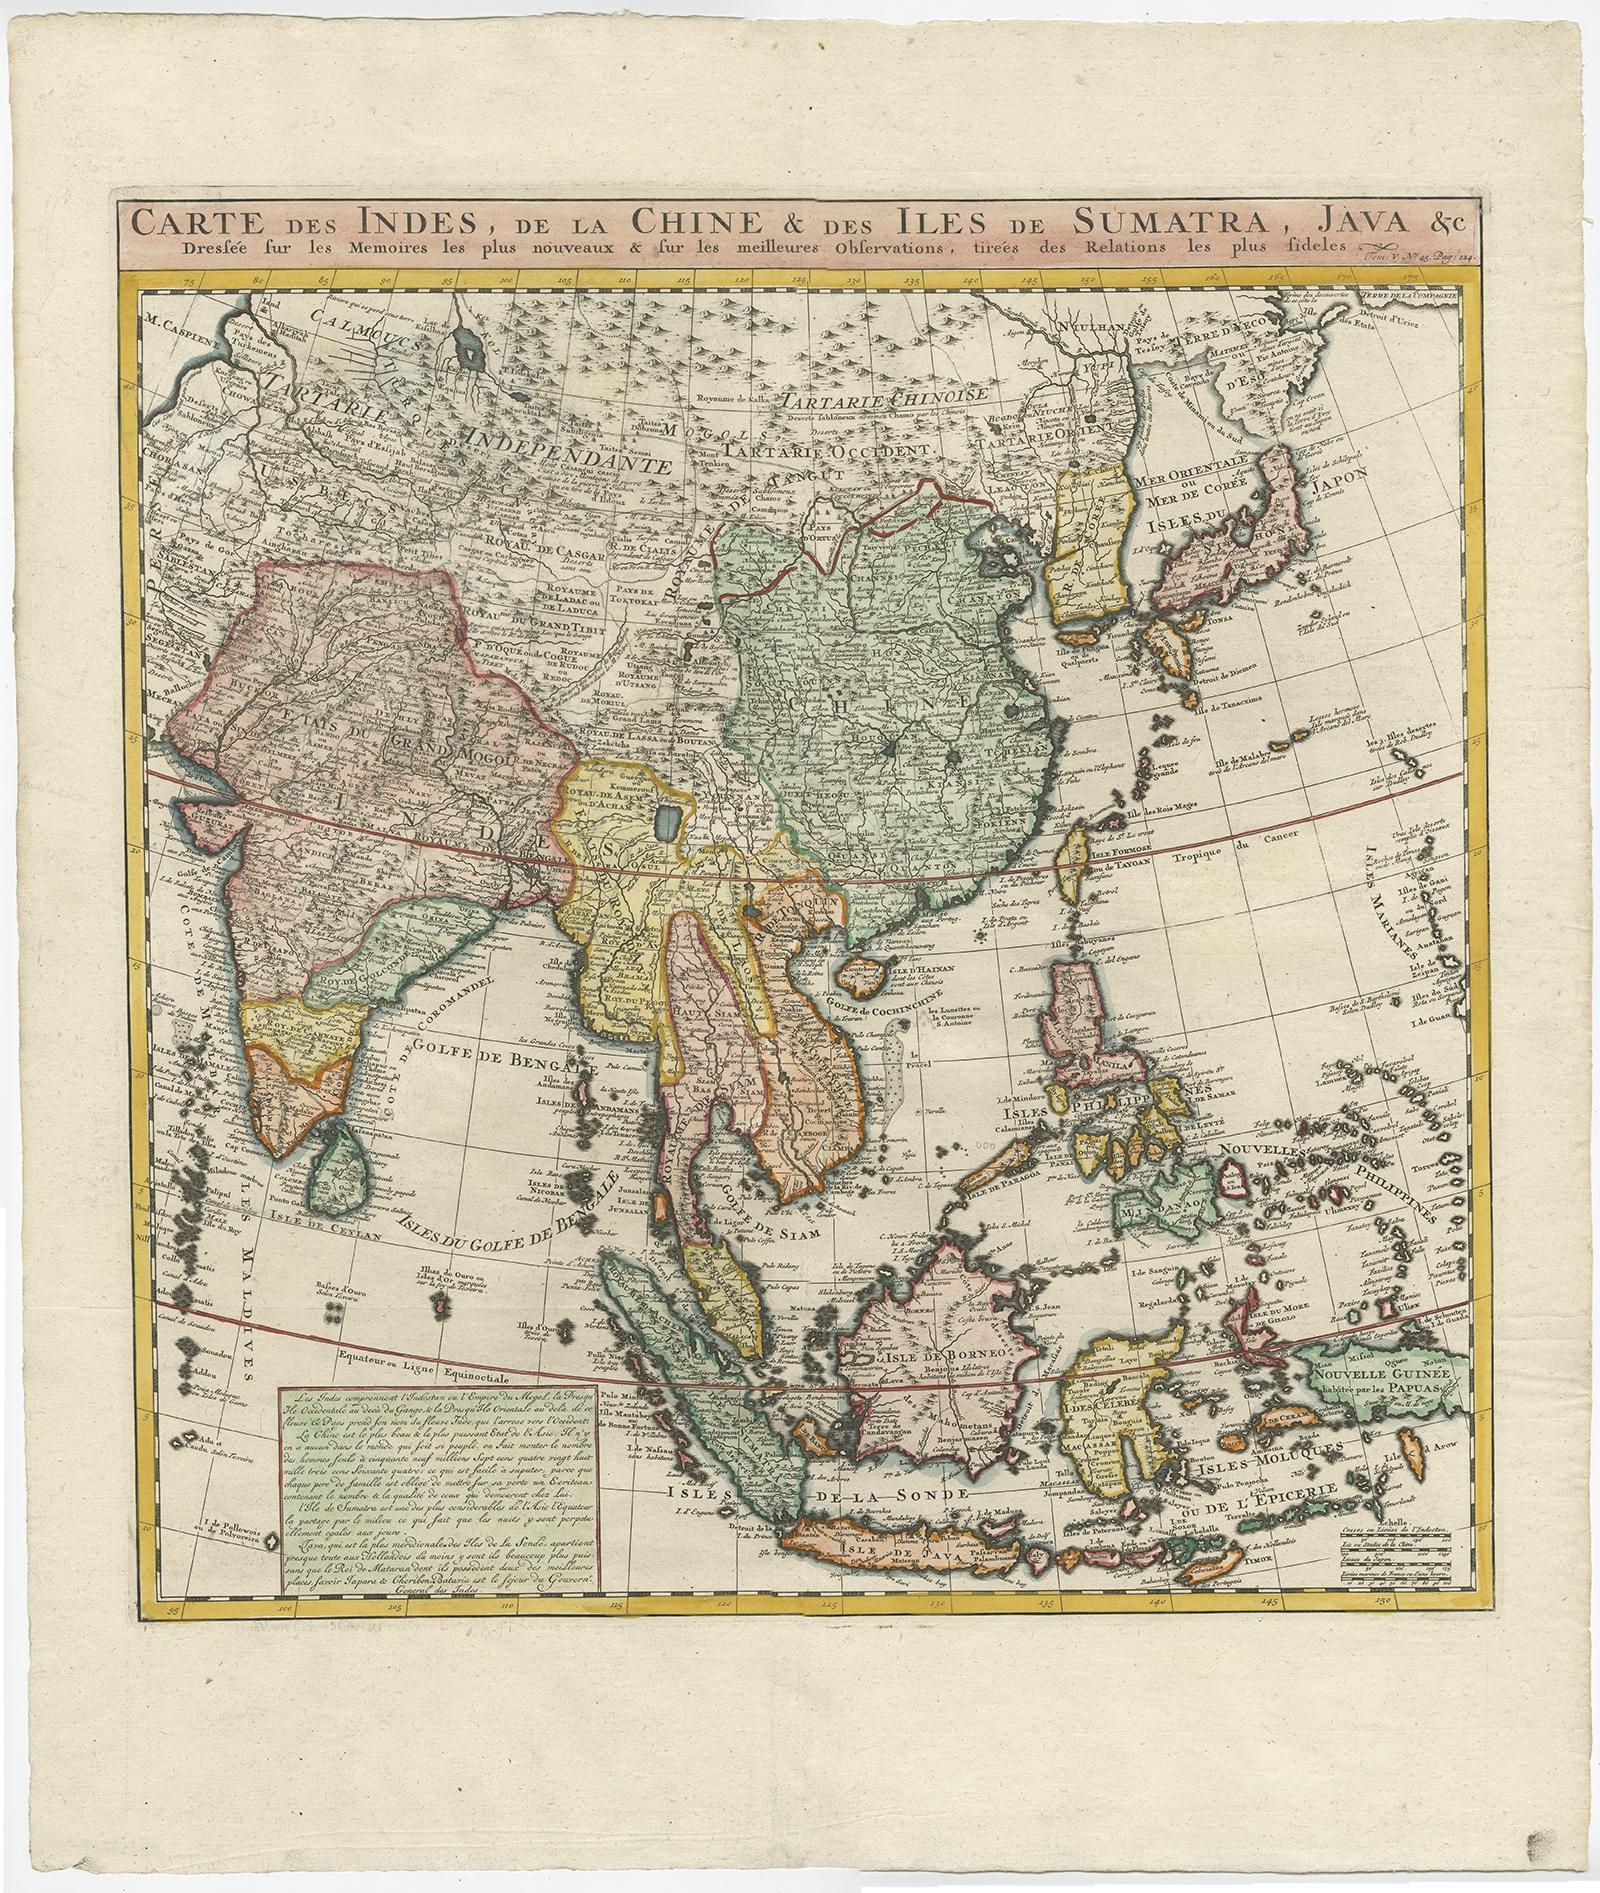 Antique map titled 'Carte des Indes, de la Chine & des Iles de Sumatra, Java & c'. 

Detailed map of India, Southeast Asia and the Far East, extending from Gujerat to the supposed 